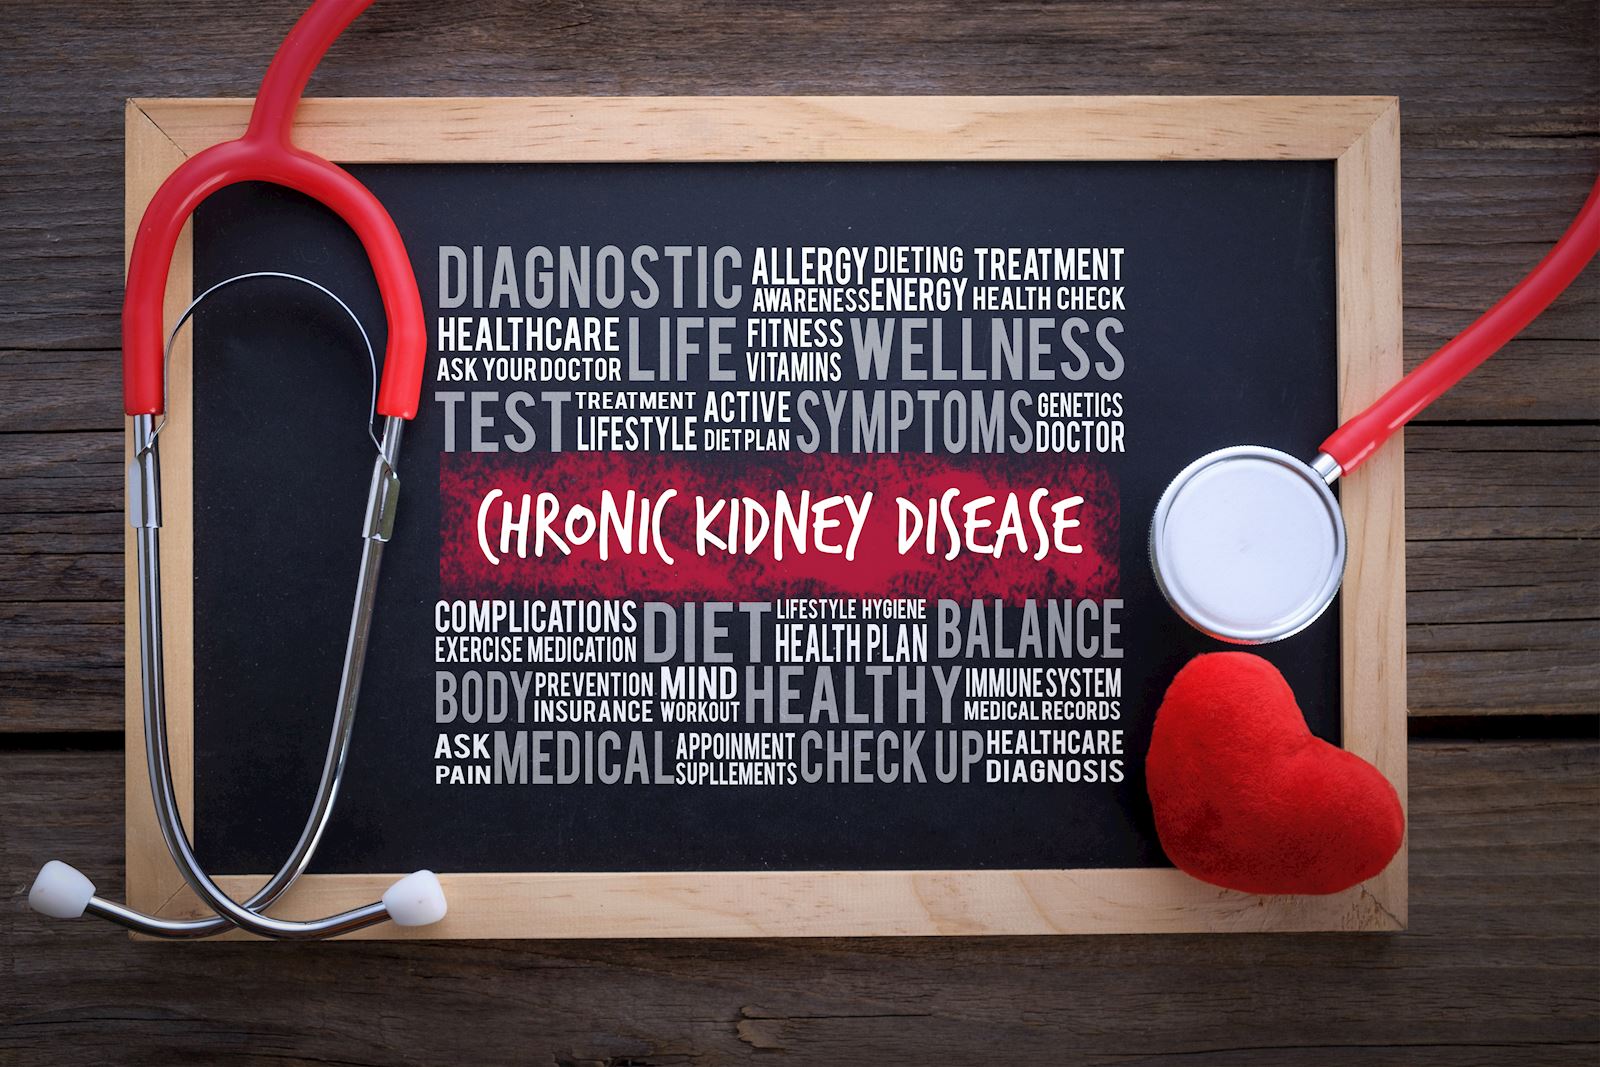 Did you know that kidney disease is the ninth leading cause of death in the United States